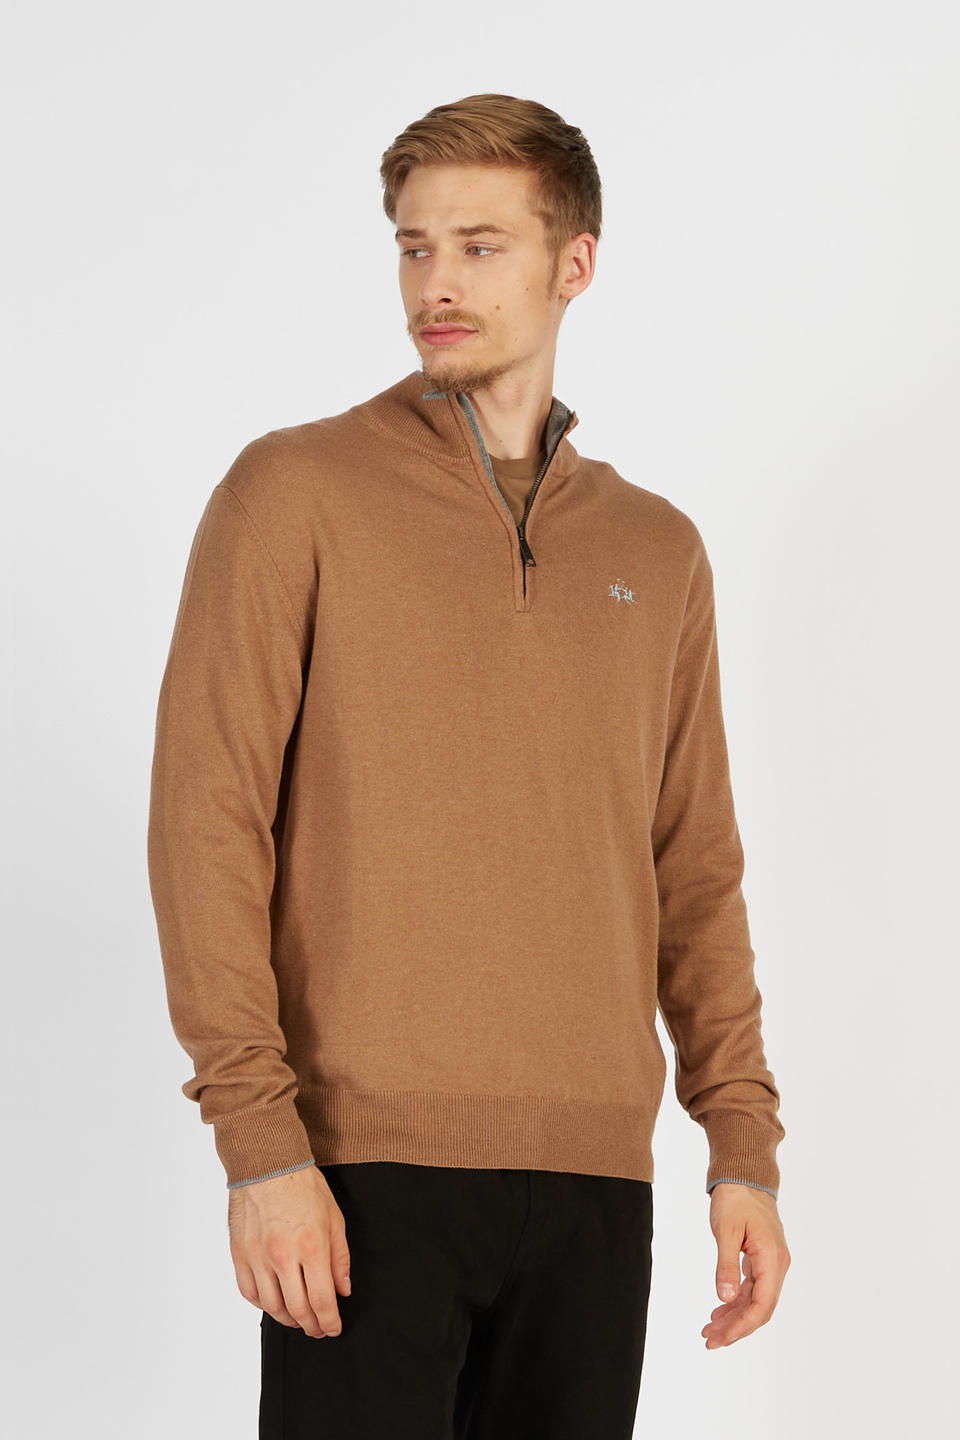 Men’s knitted sweater with long sleeves in cotton and regular fit wool blend with zip neckline | La Martina - Official Online Shop